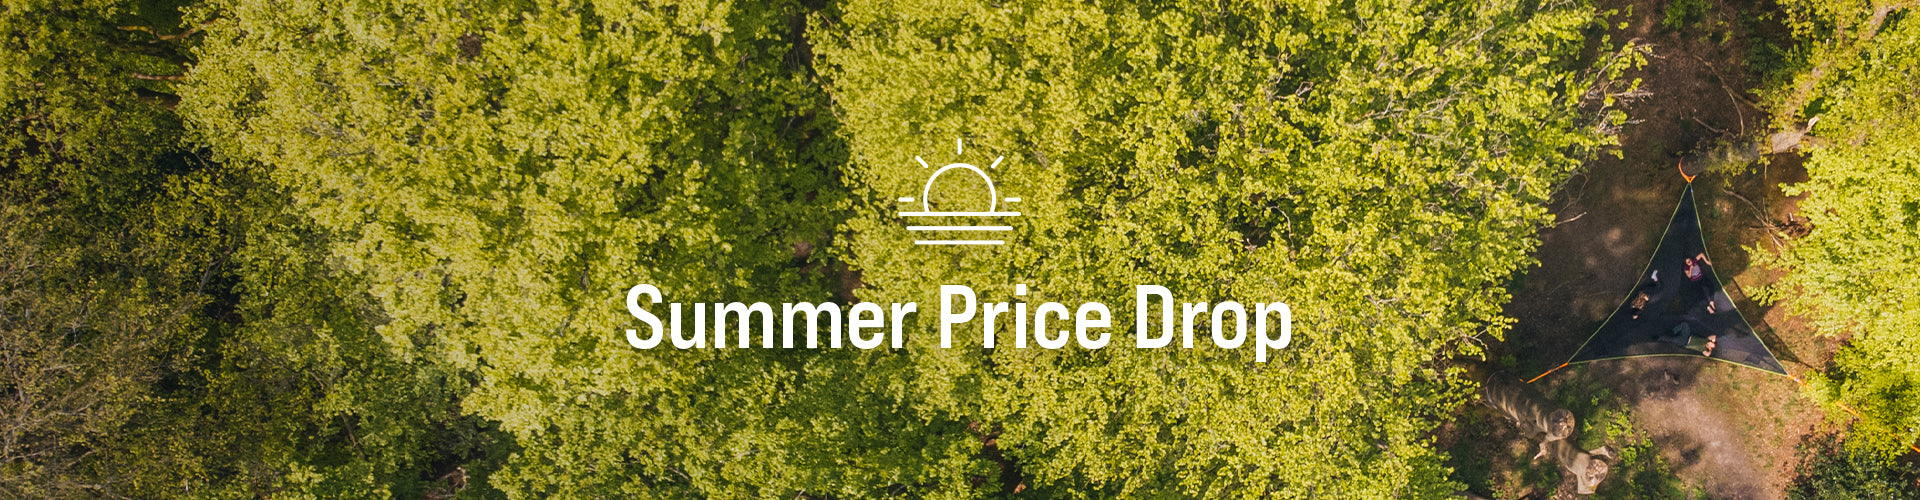 Summer Price Drop - our biggest rollback in years